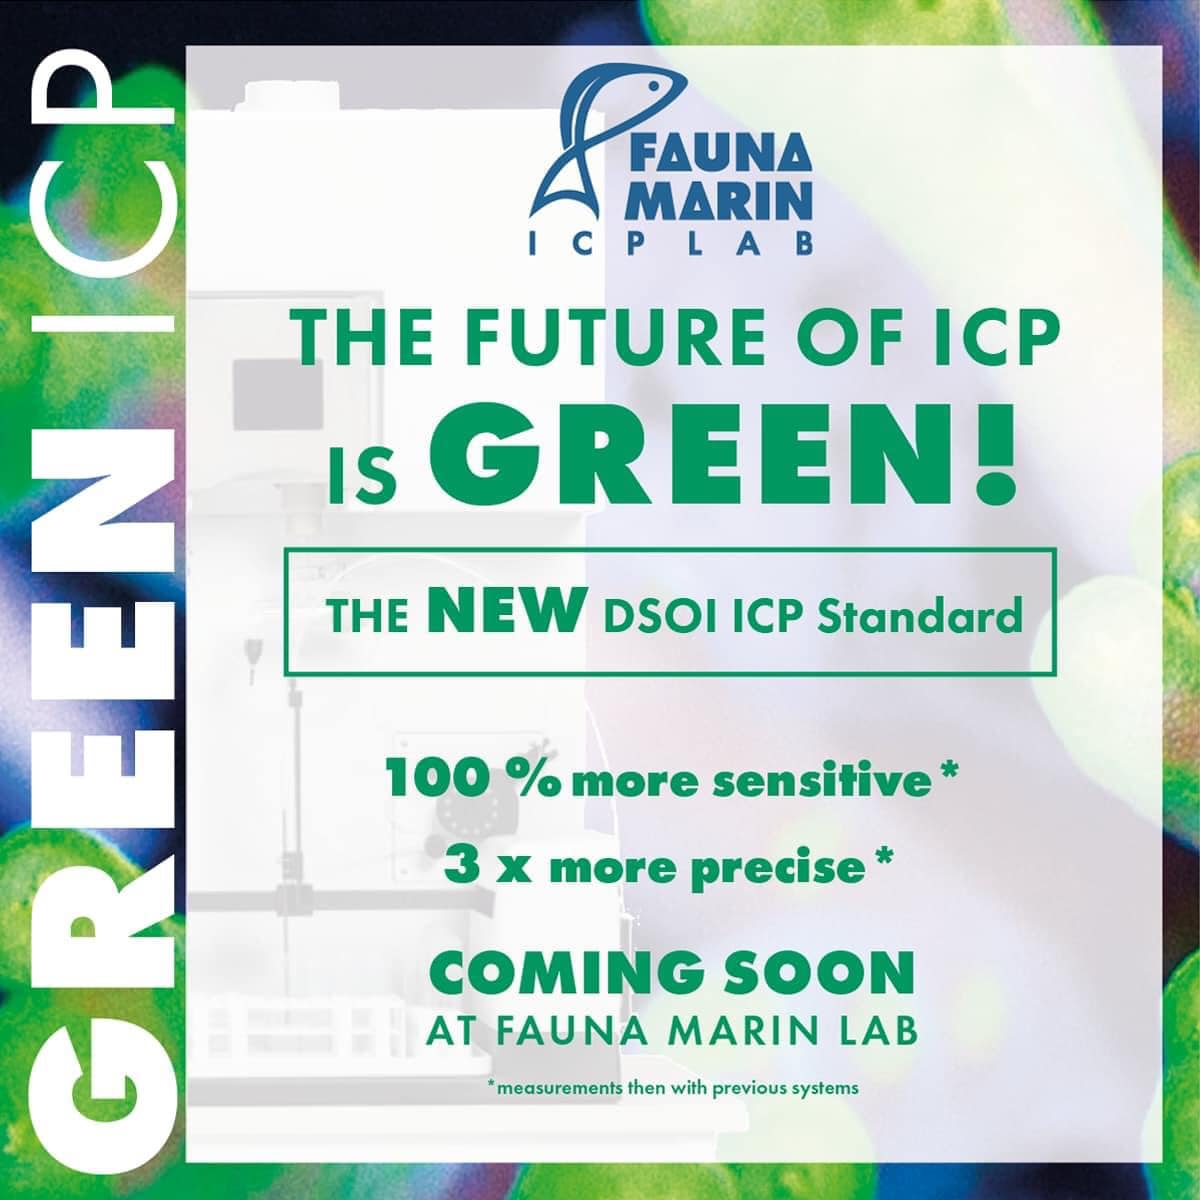 Bild könnte enthalten: ‎Text „‎පಿ PRAUN CPLAB FAUNA MARIN THE FUTURE OF ICP בם IS GREEN! THE NEW DSOI ICP Standard 100 % more sensitive* 3 X more precise* COMING SOON AT FAUNA MARIN LAB measurements then with previous systems‎“‎